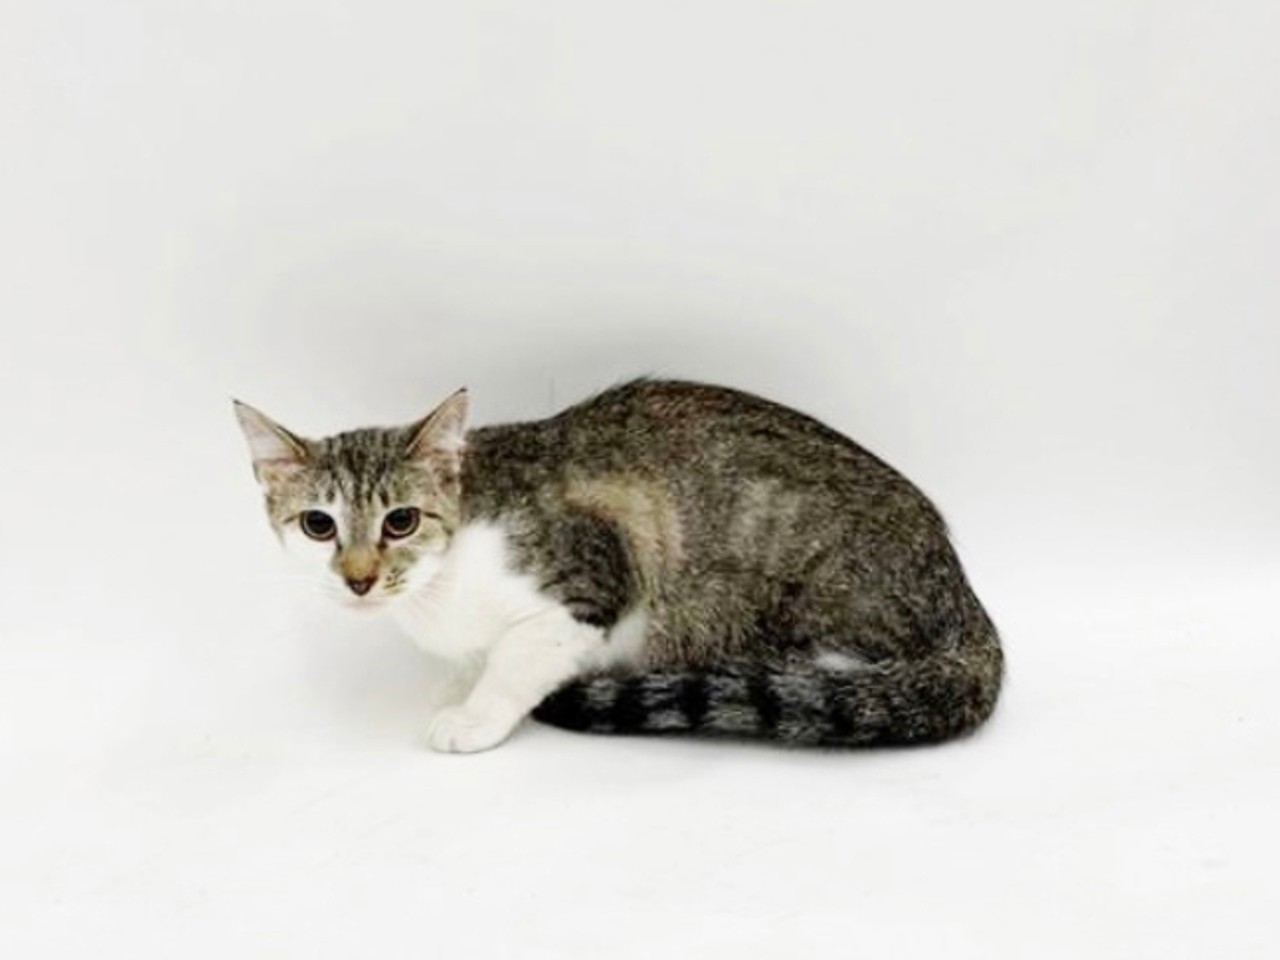 Christy; Available through the Animal Protective Association
(1705 South Hanley Road Brentwood, MO 63114, 314-645-4610)
Christy is a sleepy little thang who loves naps in comfy beds. Same, Christy. A one year old brown and white tabby, Christy's adoptable through the APA. She's been at the shelter just shy of a month. Her animal ID is A085980.
Photo credit: American Protective Association